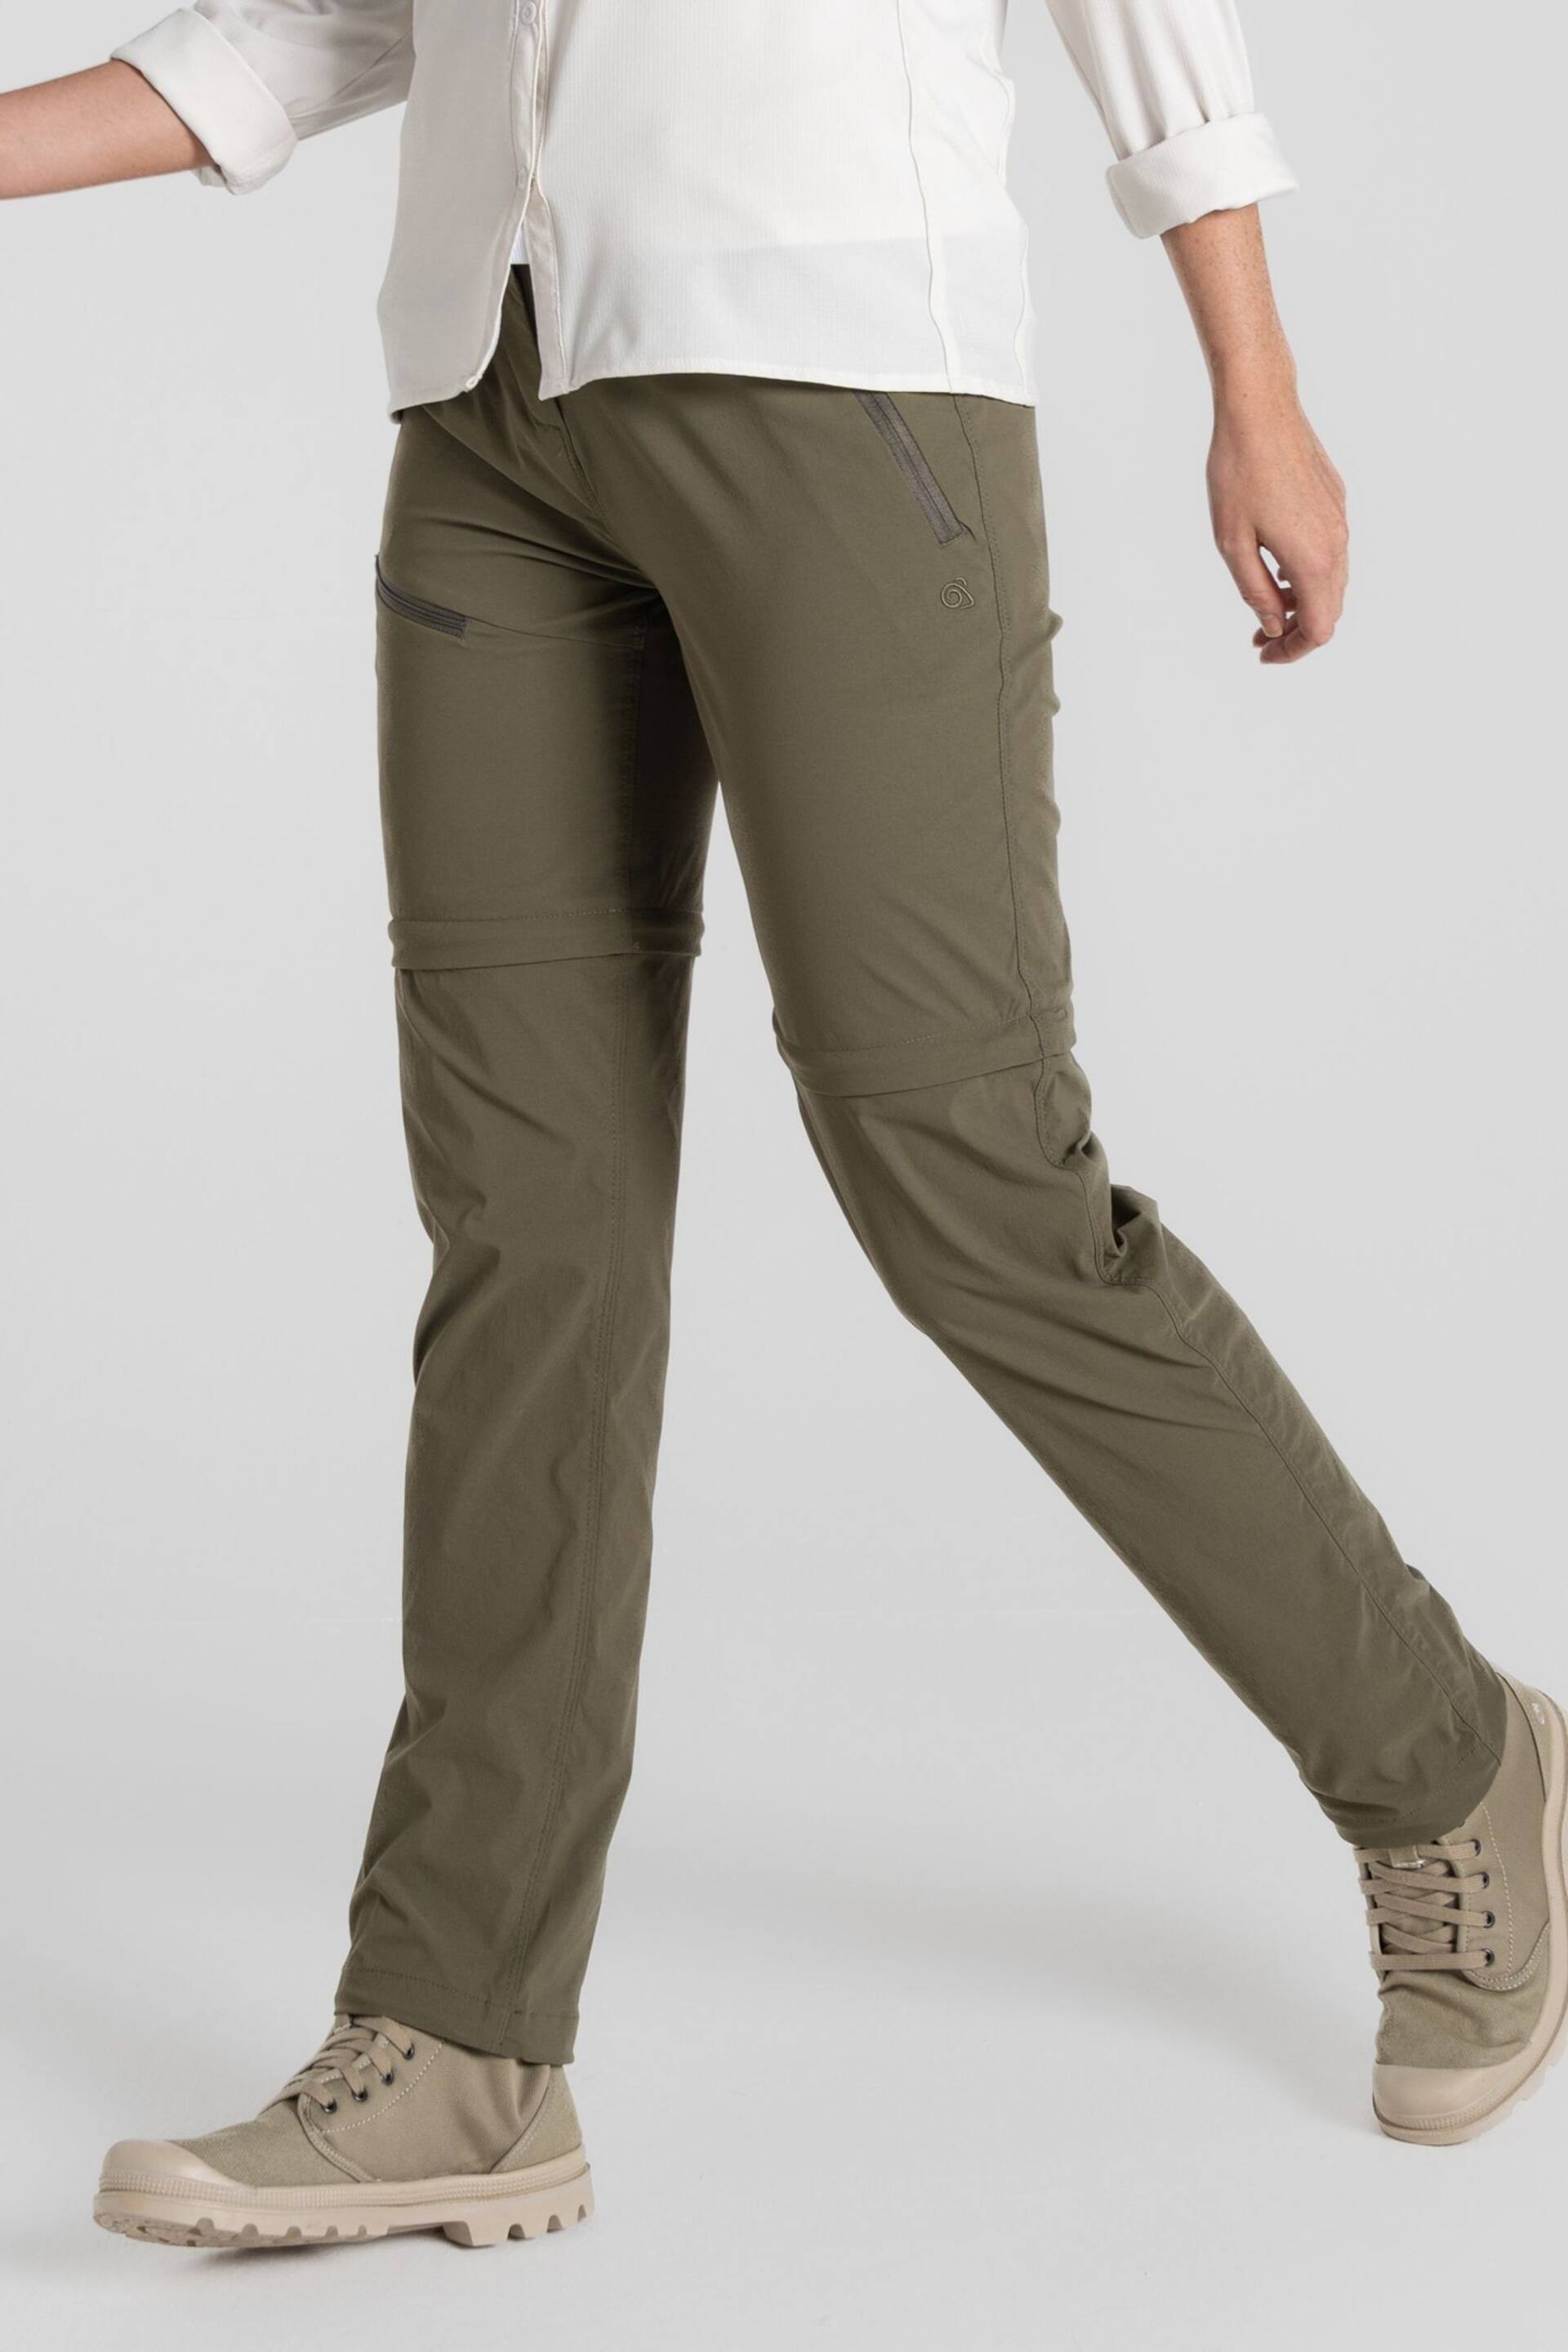 Craghoppers Green NL PRO Convertible III Trousers - Image 5 of 7